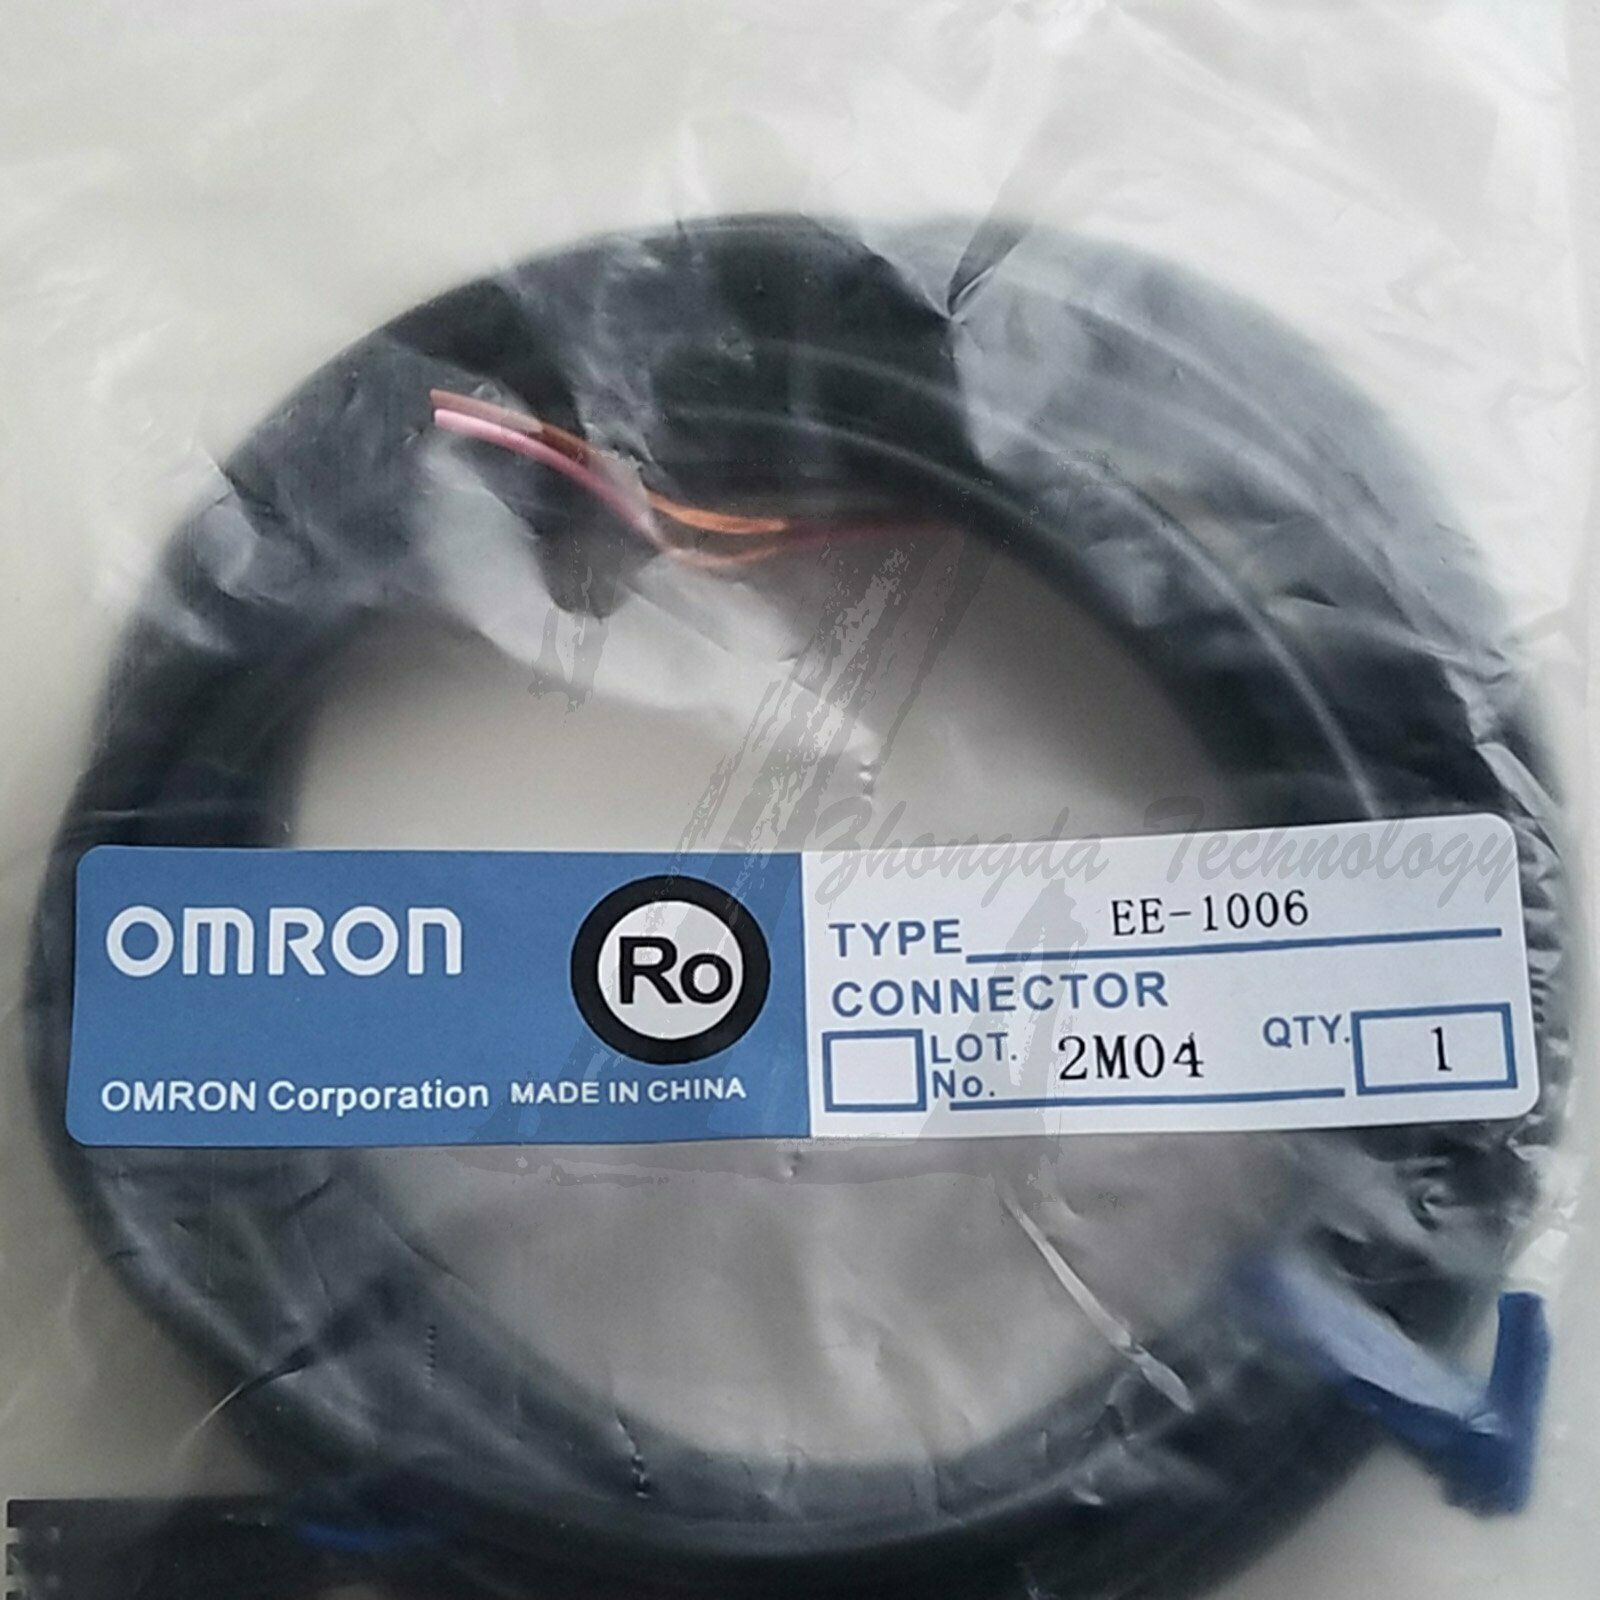 1pc new OMRON plug-in EE-1006 module one year warranty KOEED 1, 80%, import_2020_10_10_031751, Omron, Other